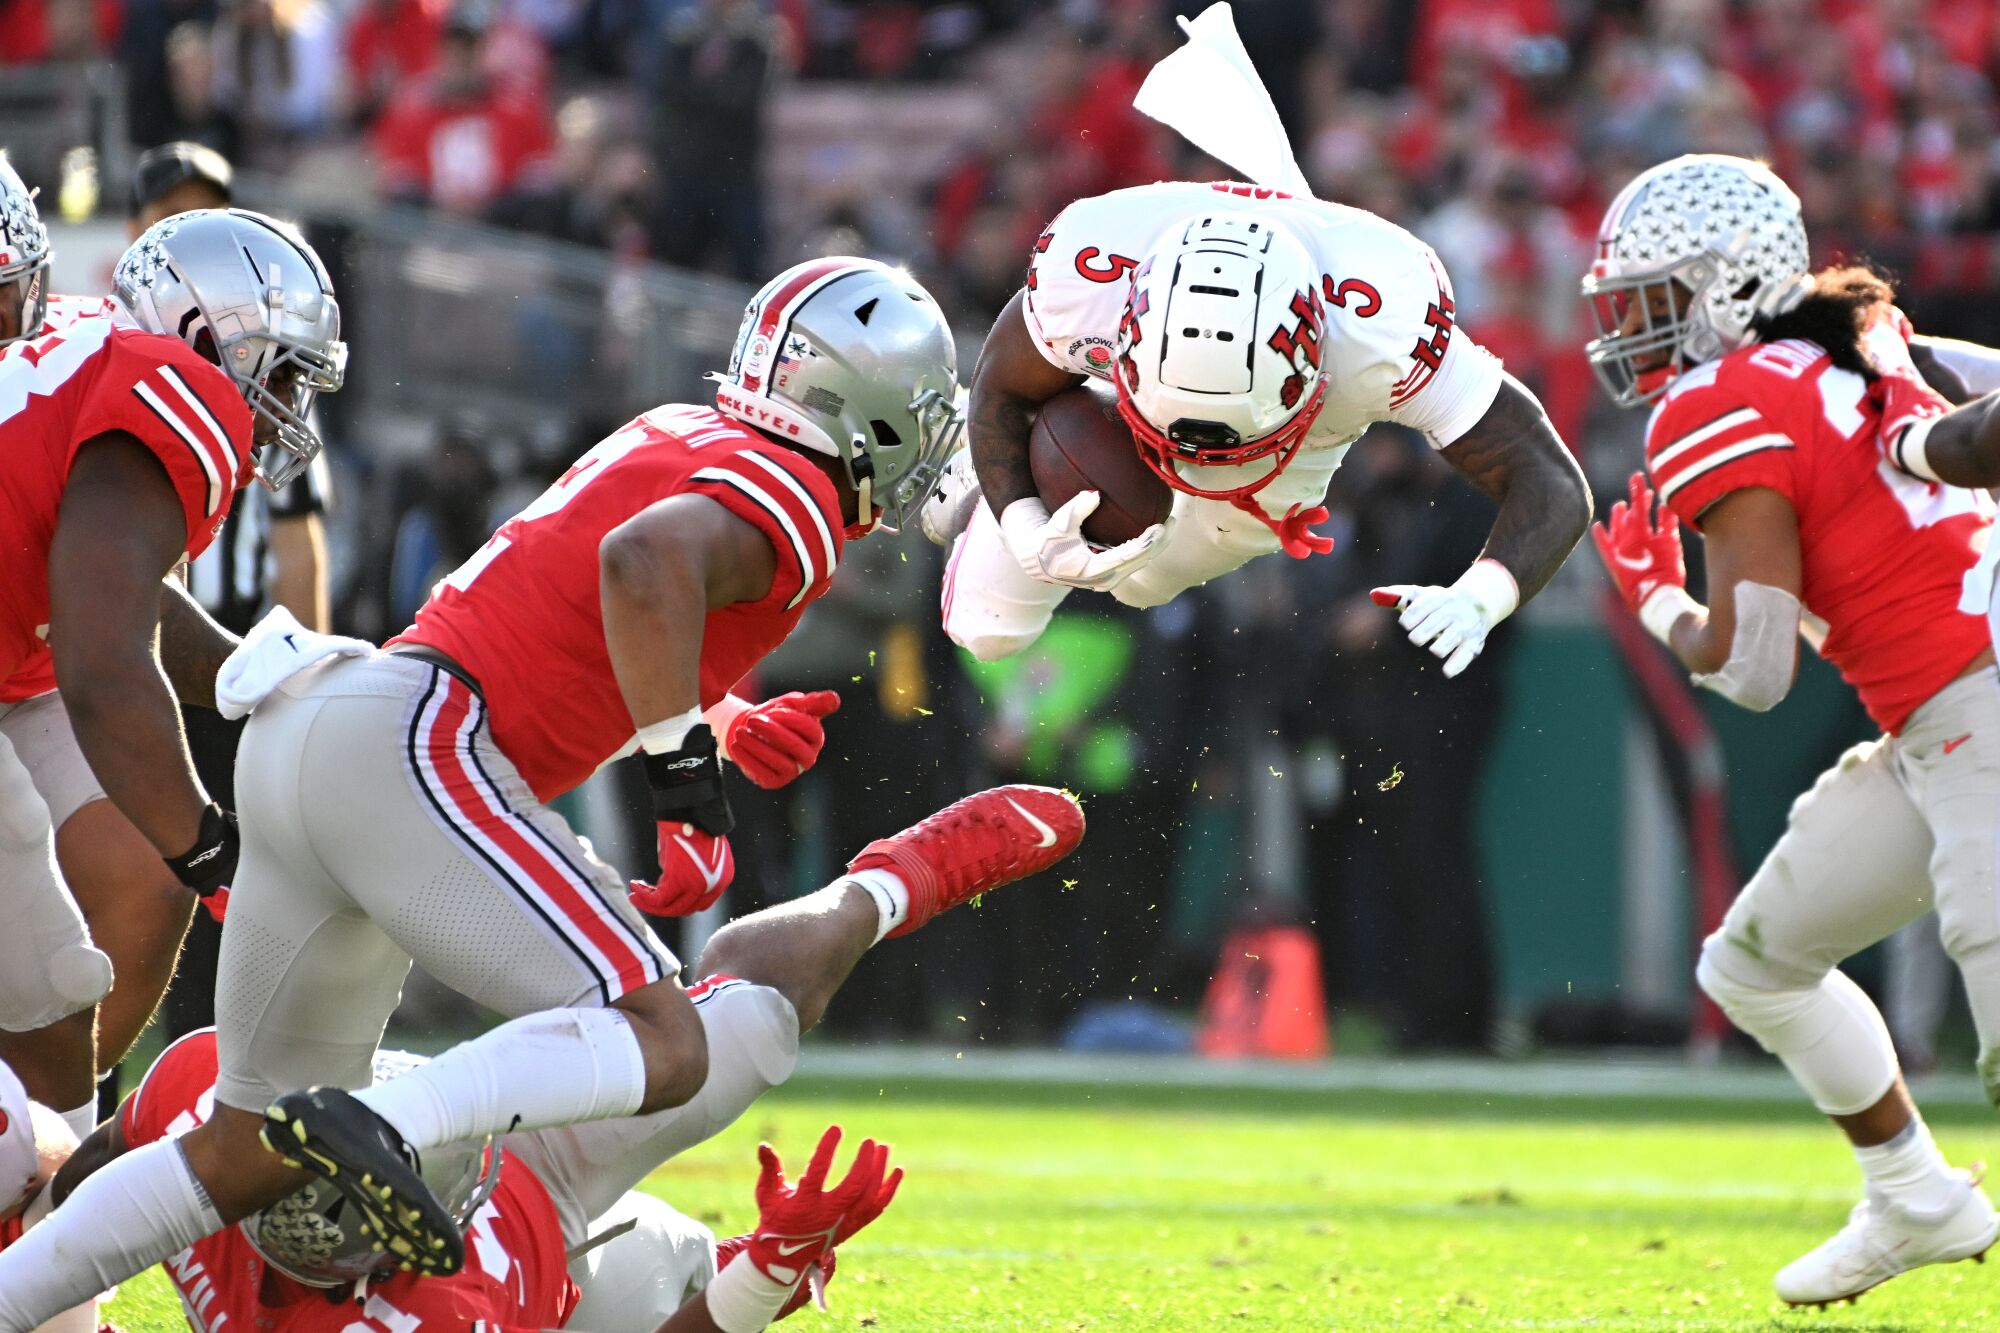  Utah running back T.J. Pledger goes airborne after being upended by the Ohio State defense.